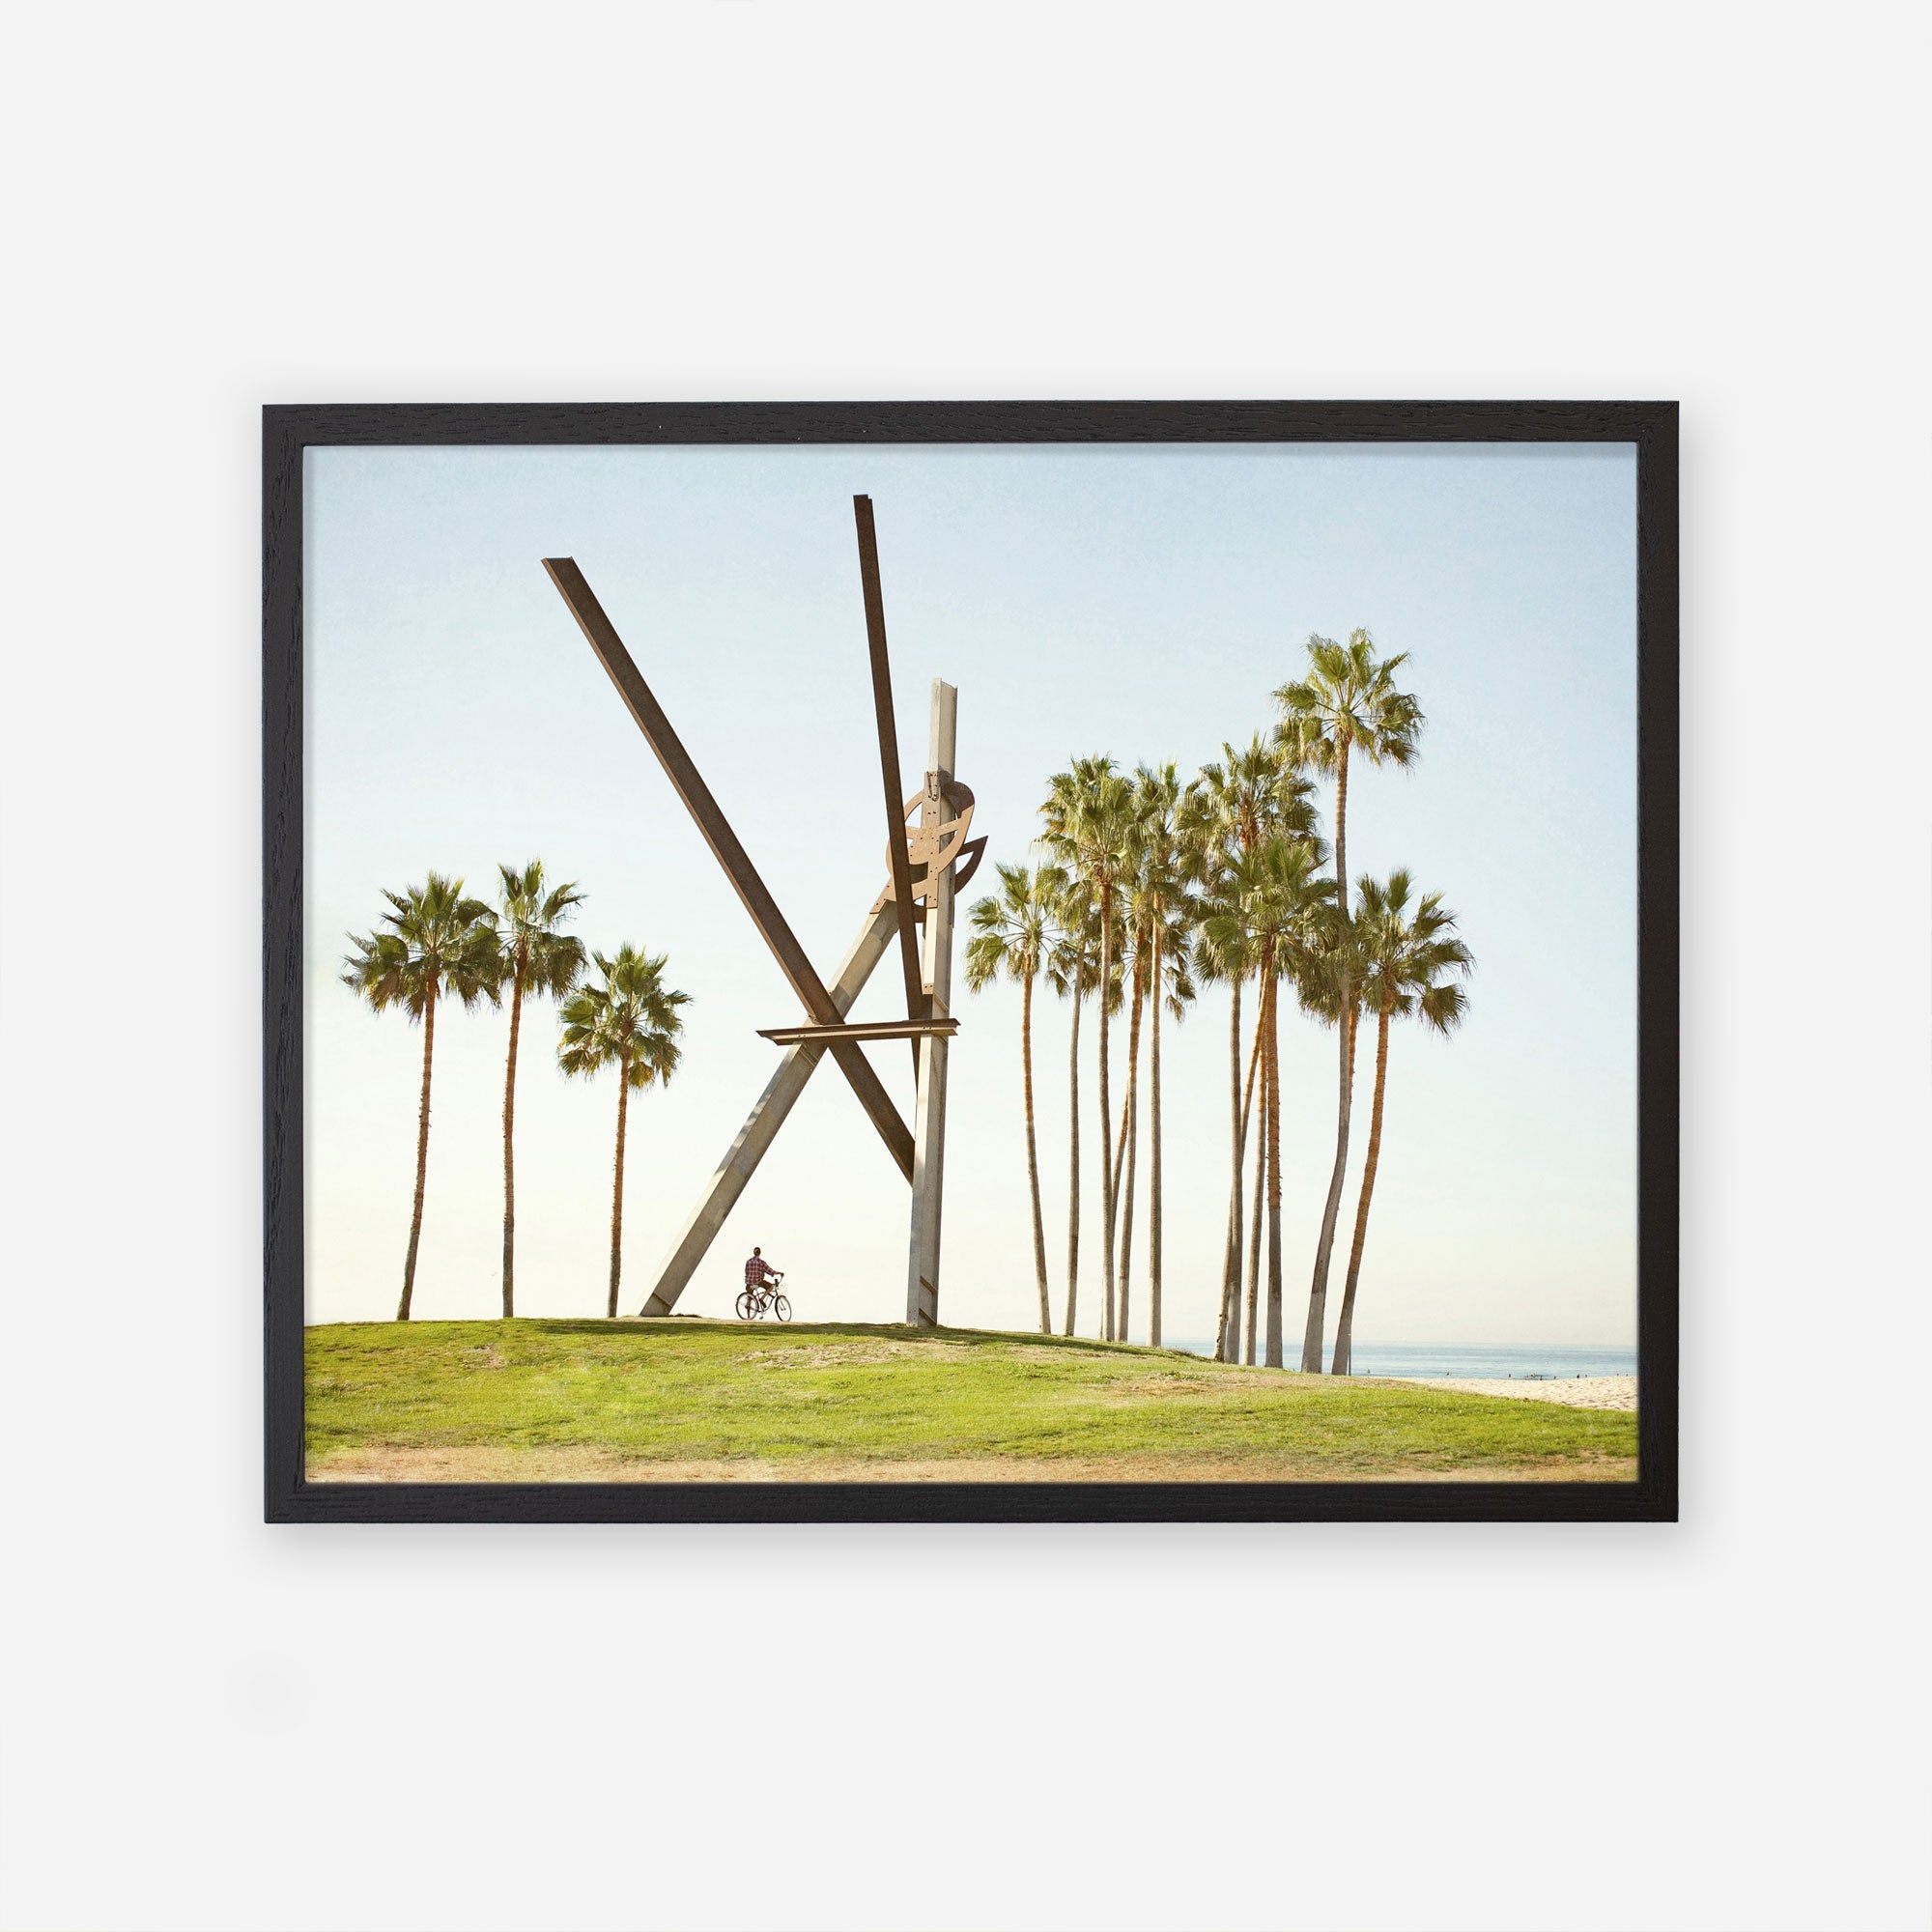 A framed artwork depicting the Venice Beach Landmark Sculpture, &#39;V is for Venice&#39;, by Offley Green on a grassy knoll near Venice Beach, surrounded by tall palm trees, with a clear sky in the background and a cyclist at its base.